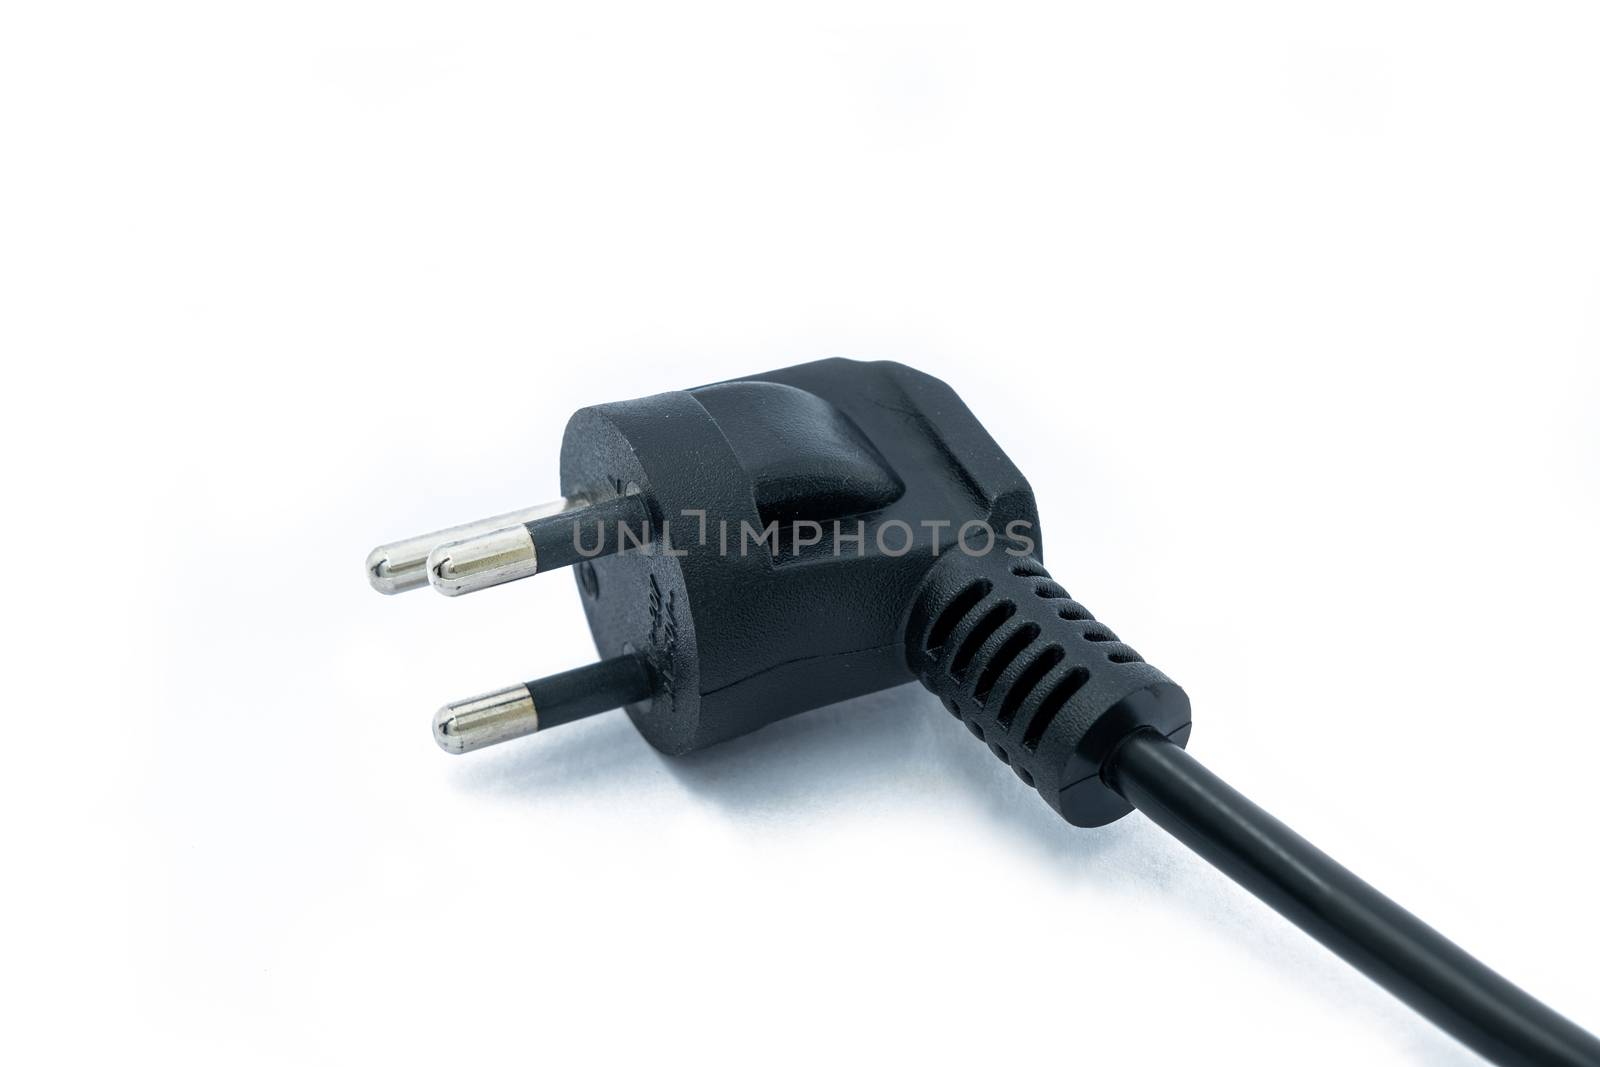 Grounded electric cable cord ready to plug or unplug from power on white background by peerapixs